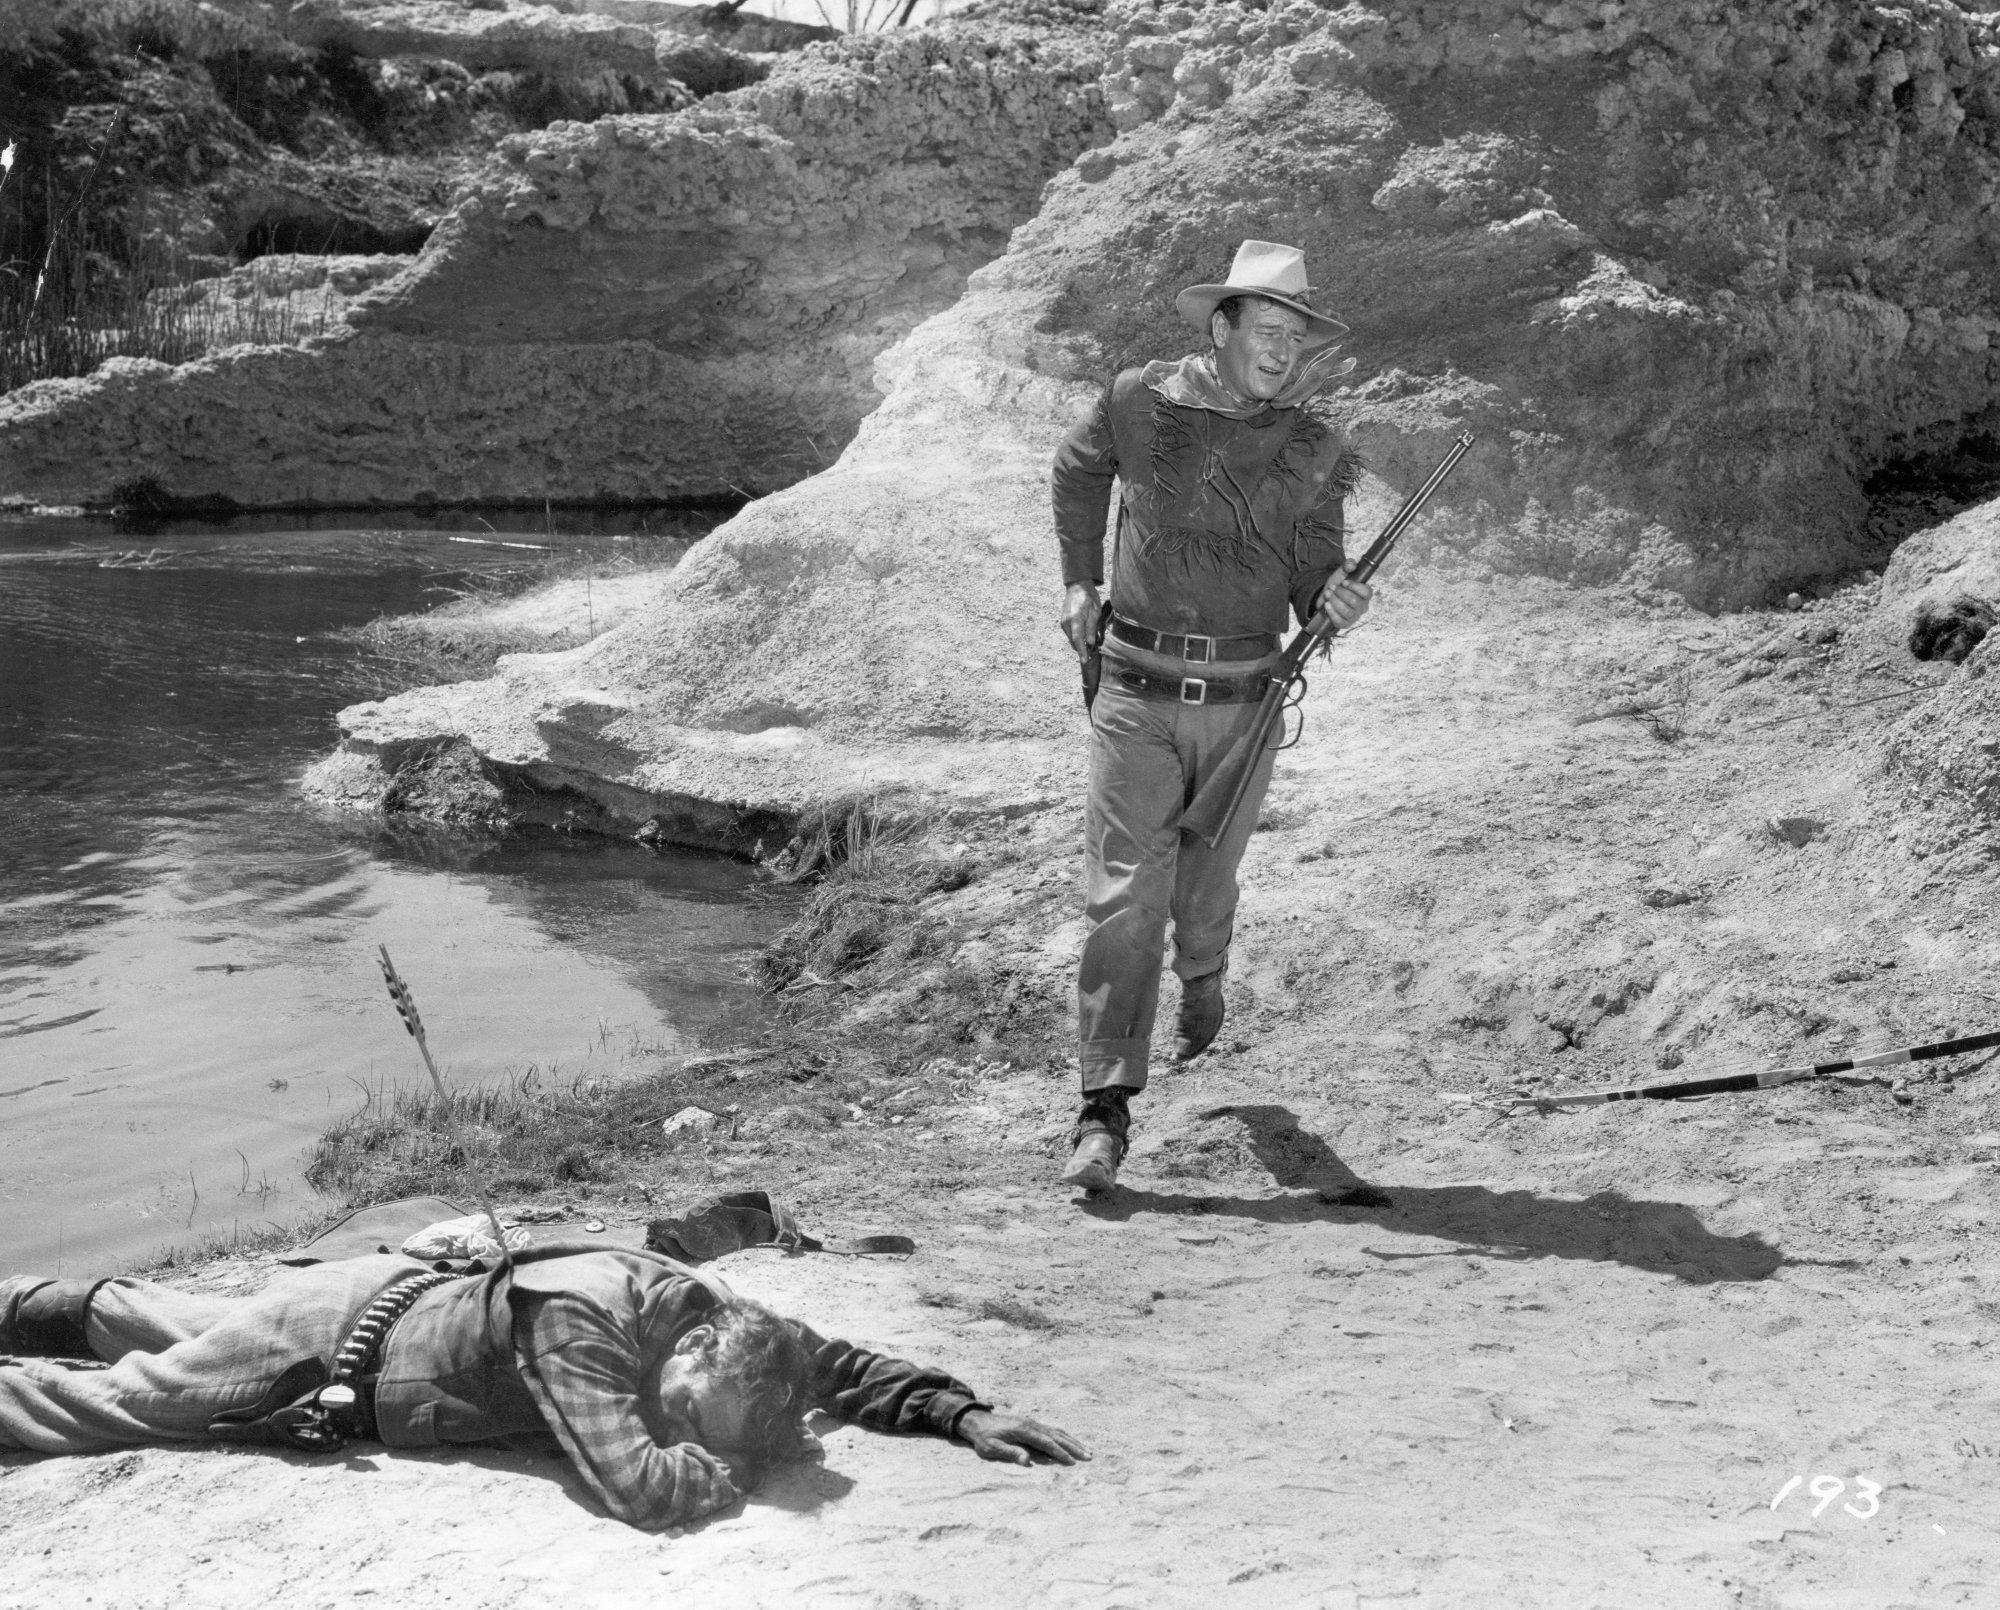 Frank McGrath as Lowe's Partner and John Wayne as Hondo Lane in 'Hondo' movie with McGrath on the ground with an arrow in his back. Wayne walking next to him with Western clothes on.